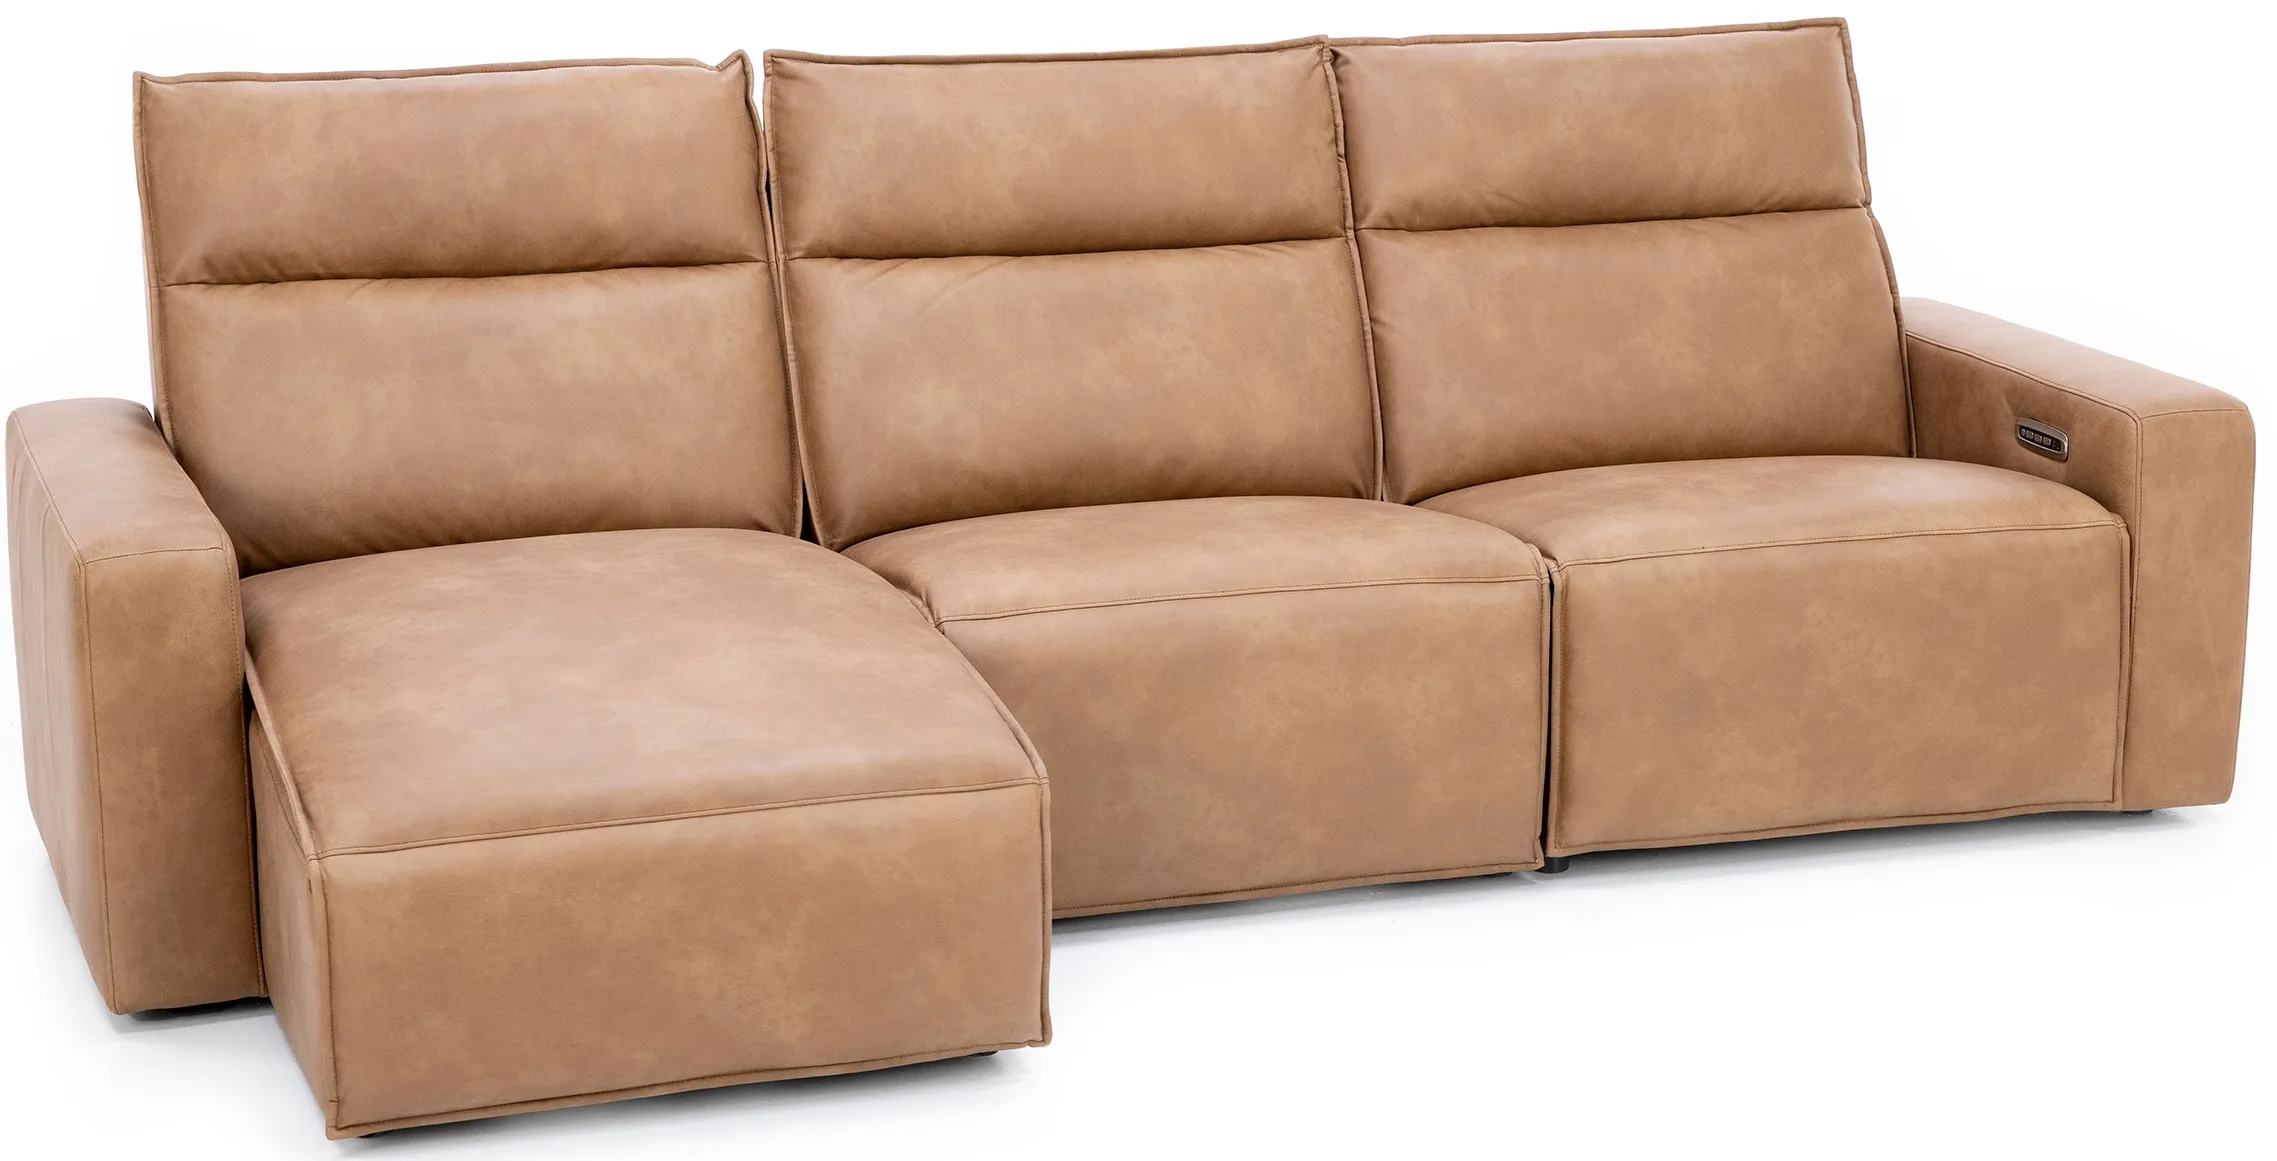 Direct Design Reinvent Your Space 3-Pc. Power Headrest Reclining Chaise Sofa